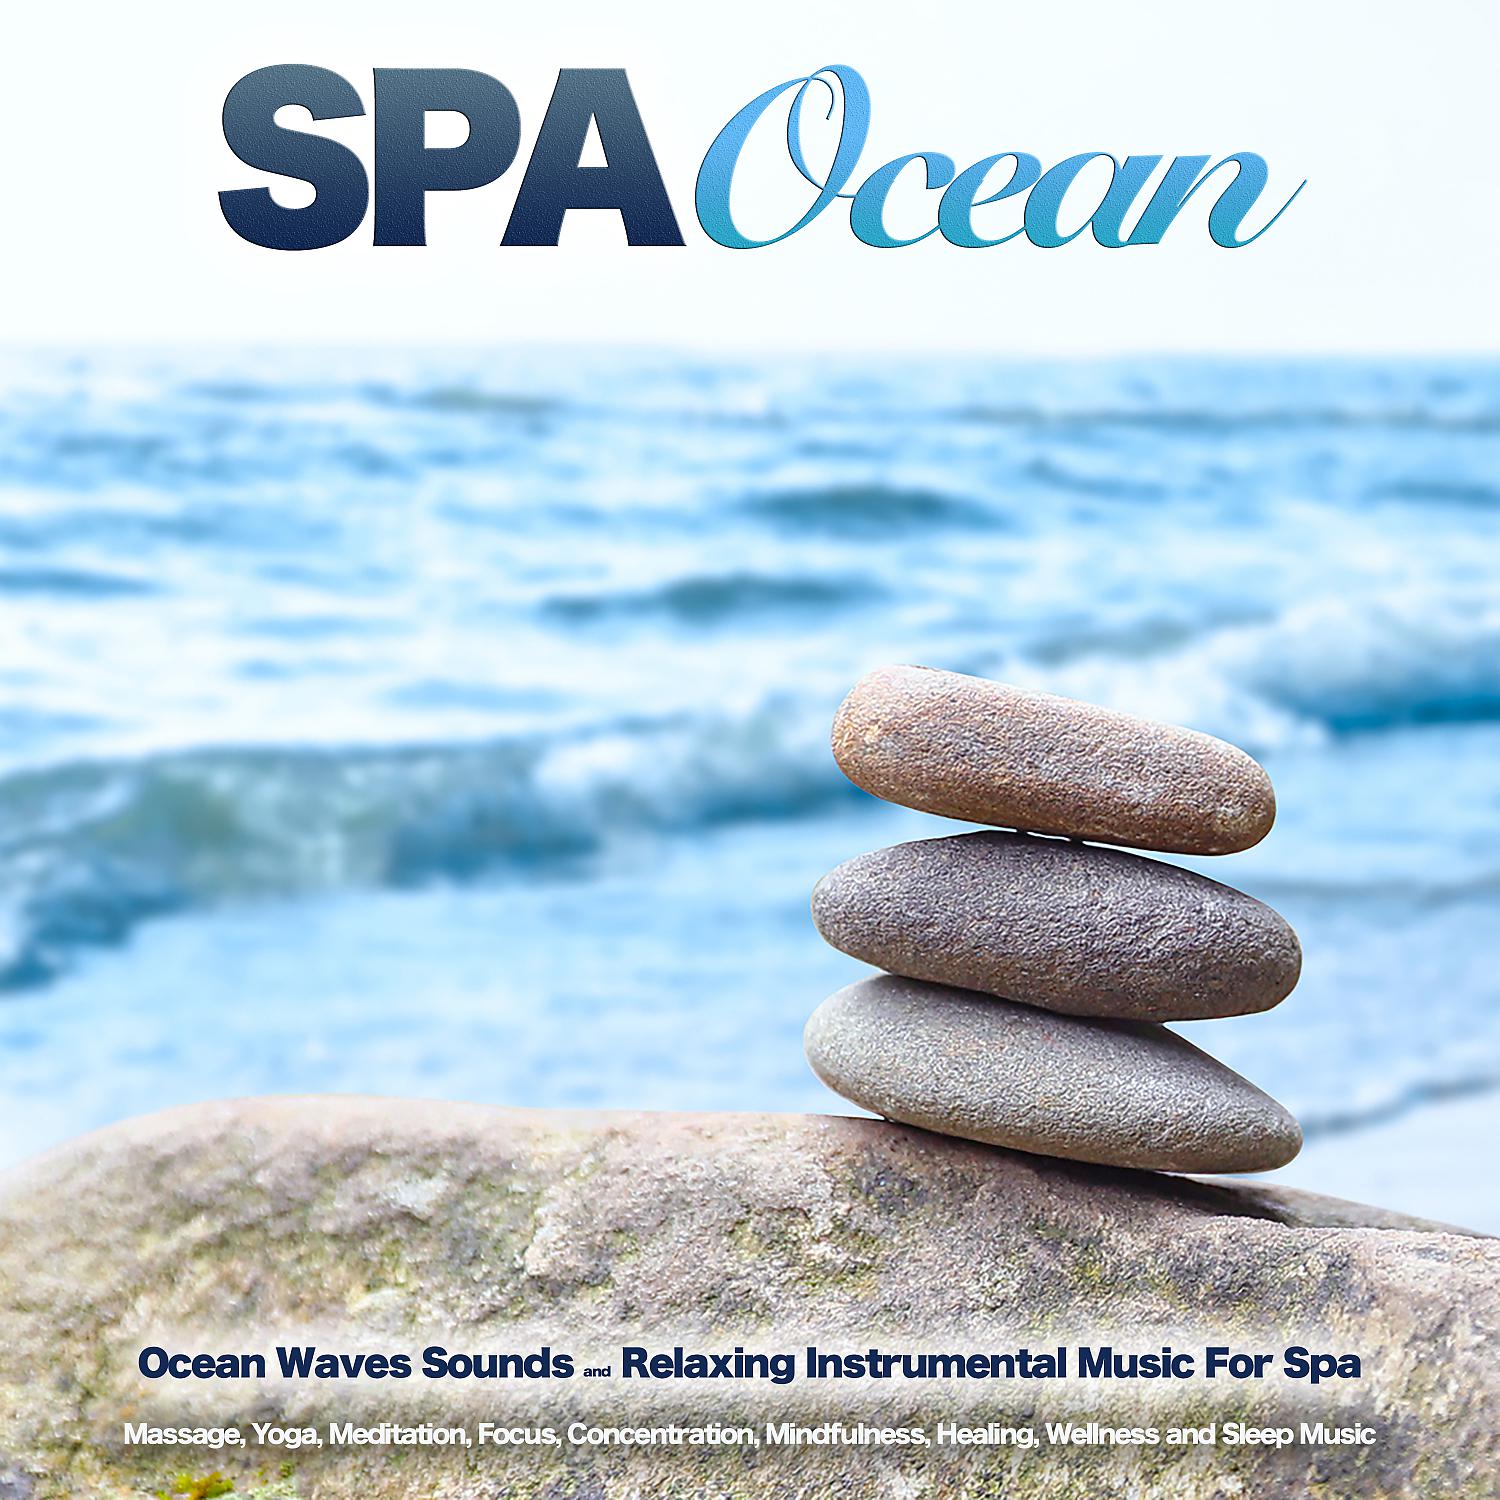 Постер альбома Spa Ocean: Ocean Waves Sounds and Relaxing Instrumental Music For Spa, Massage, Yoga, Meditation, Focus, Concentration, Mindfulness, Healing, Wellness and Sleep Music